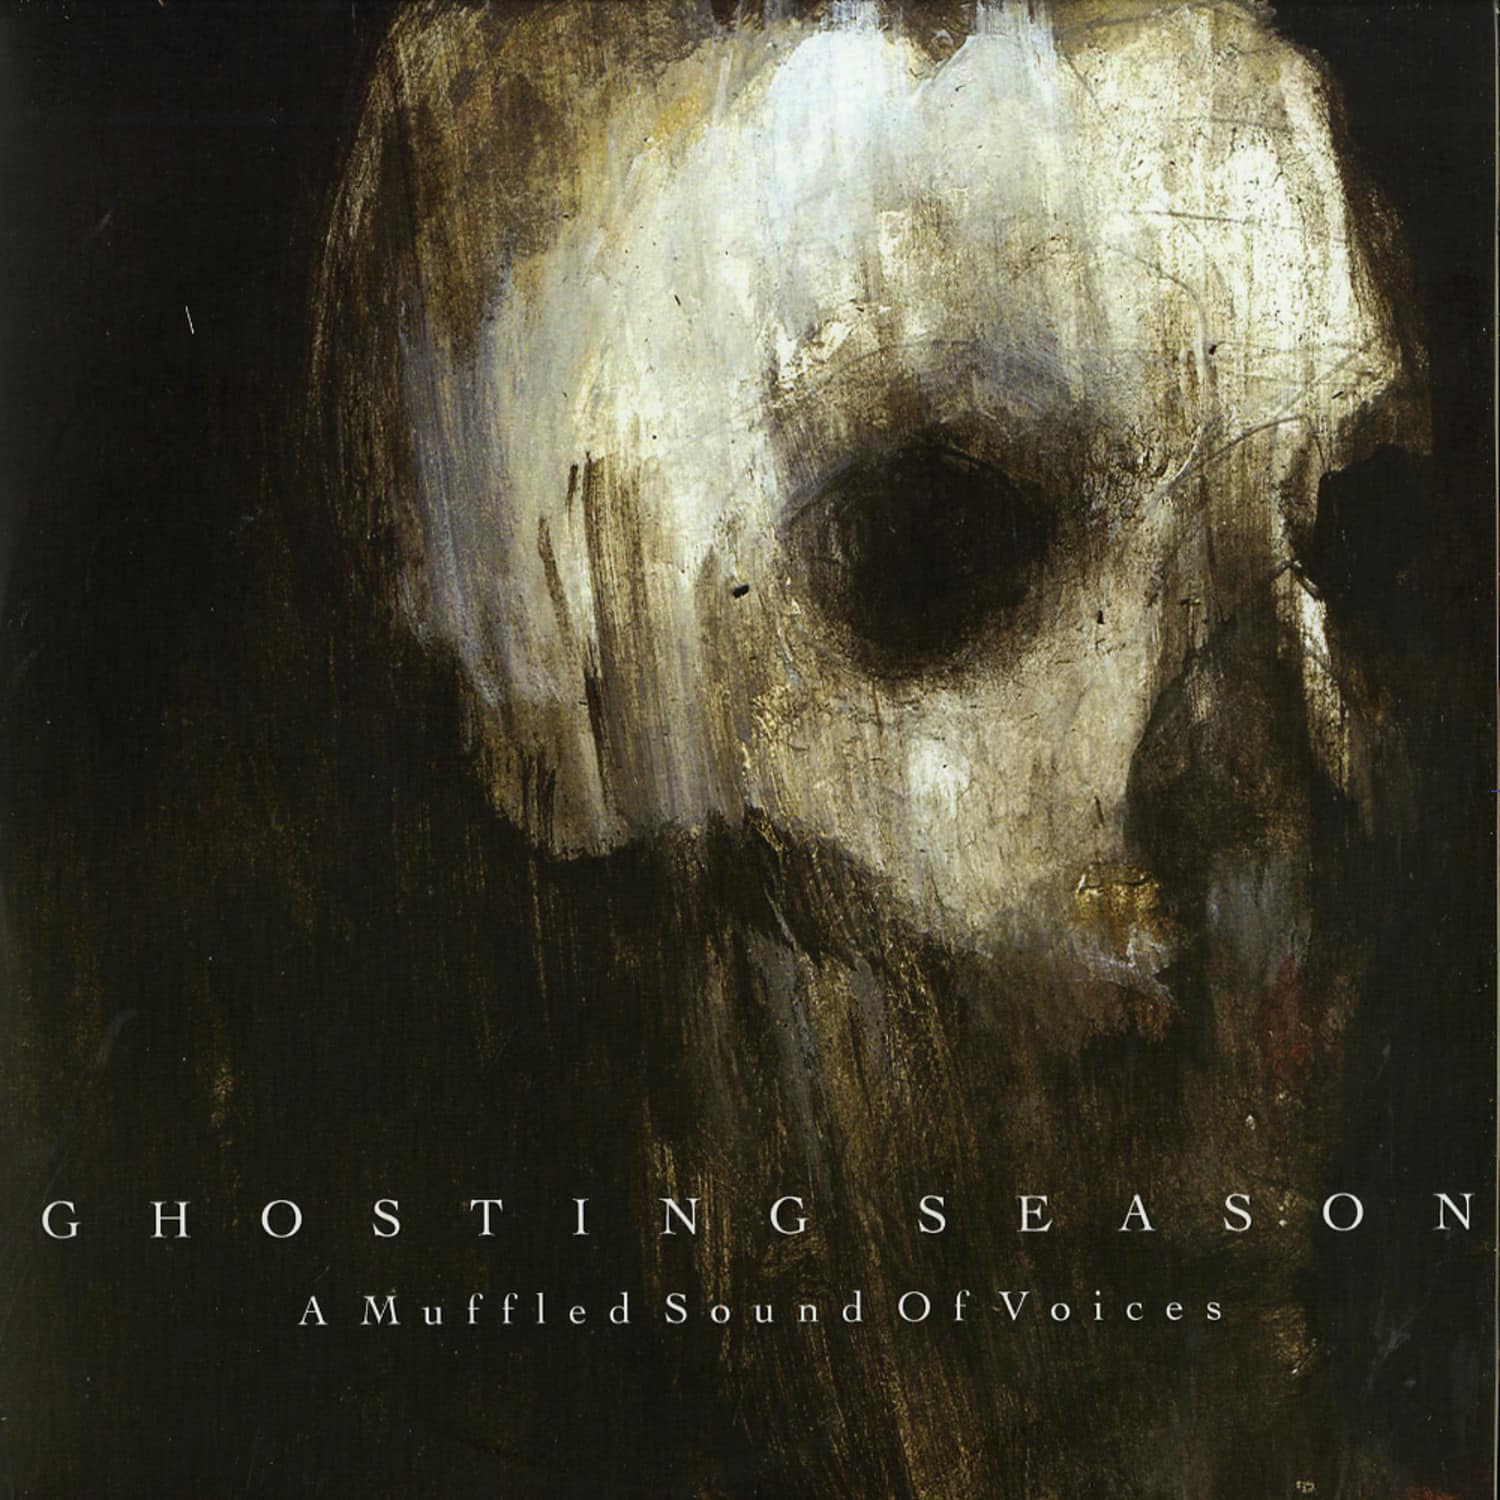 Ghosting Season - A MUFFLED SOUND OF VOICES 